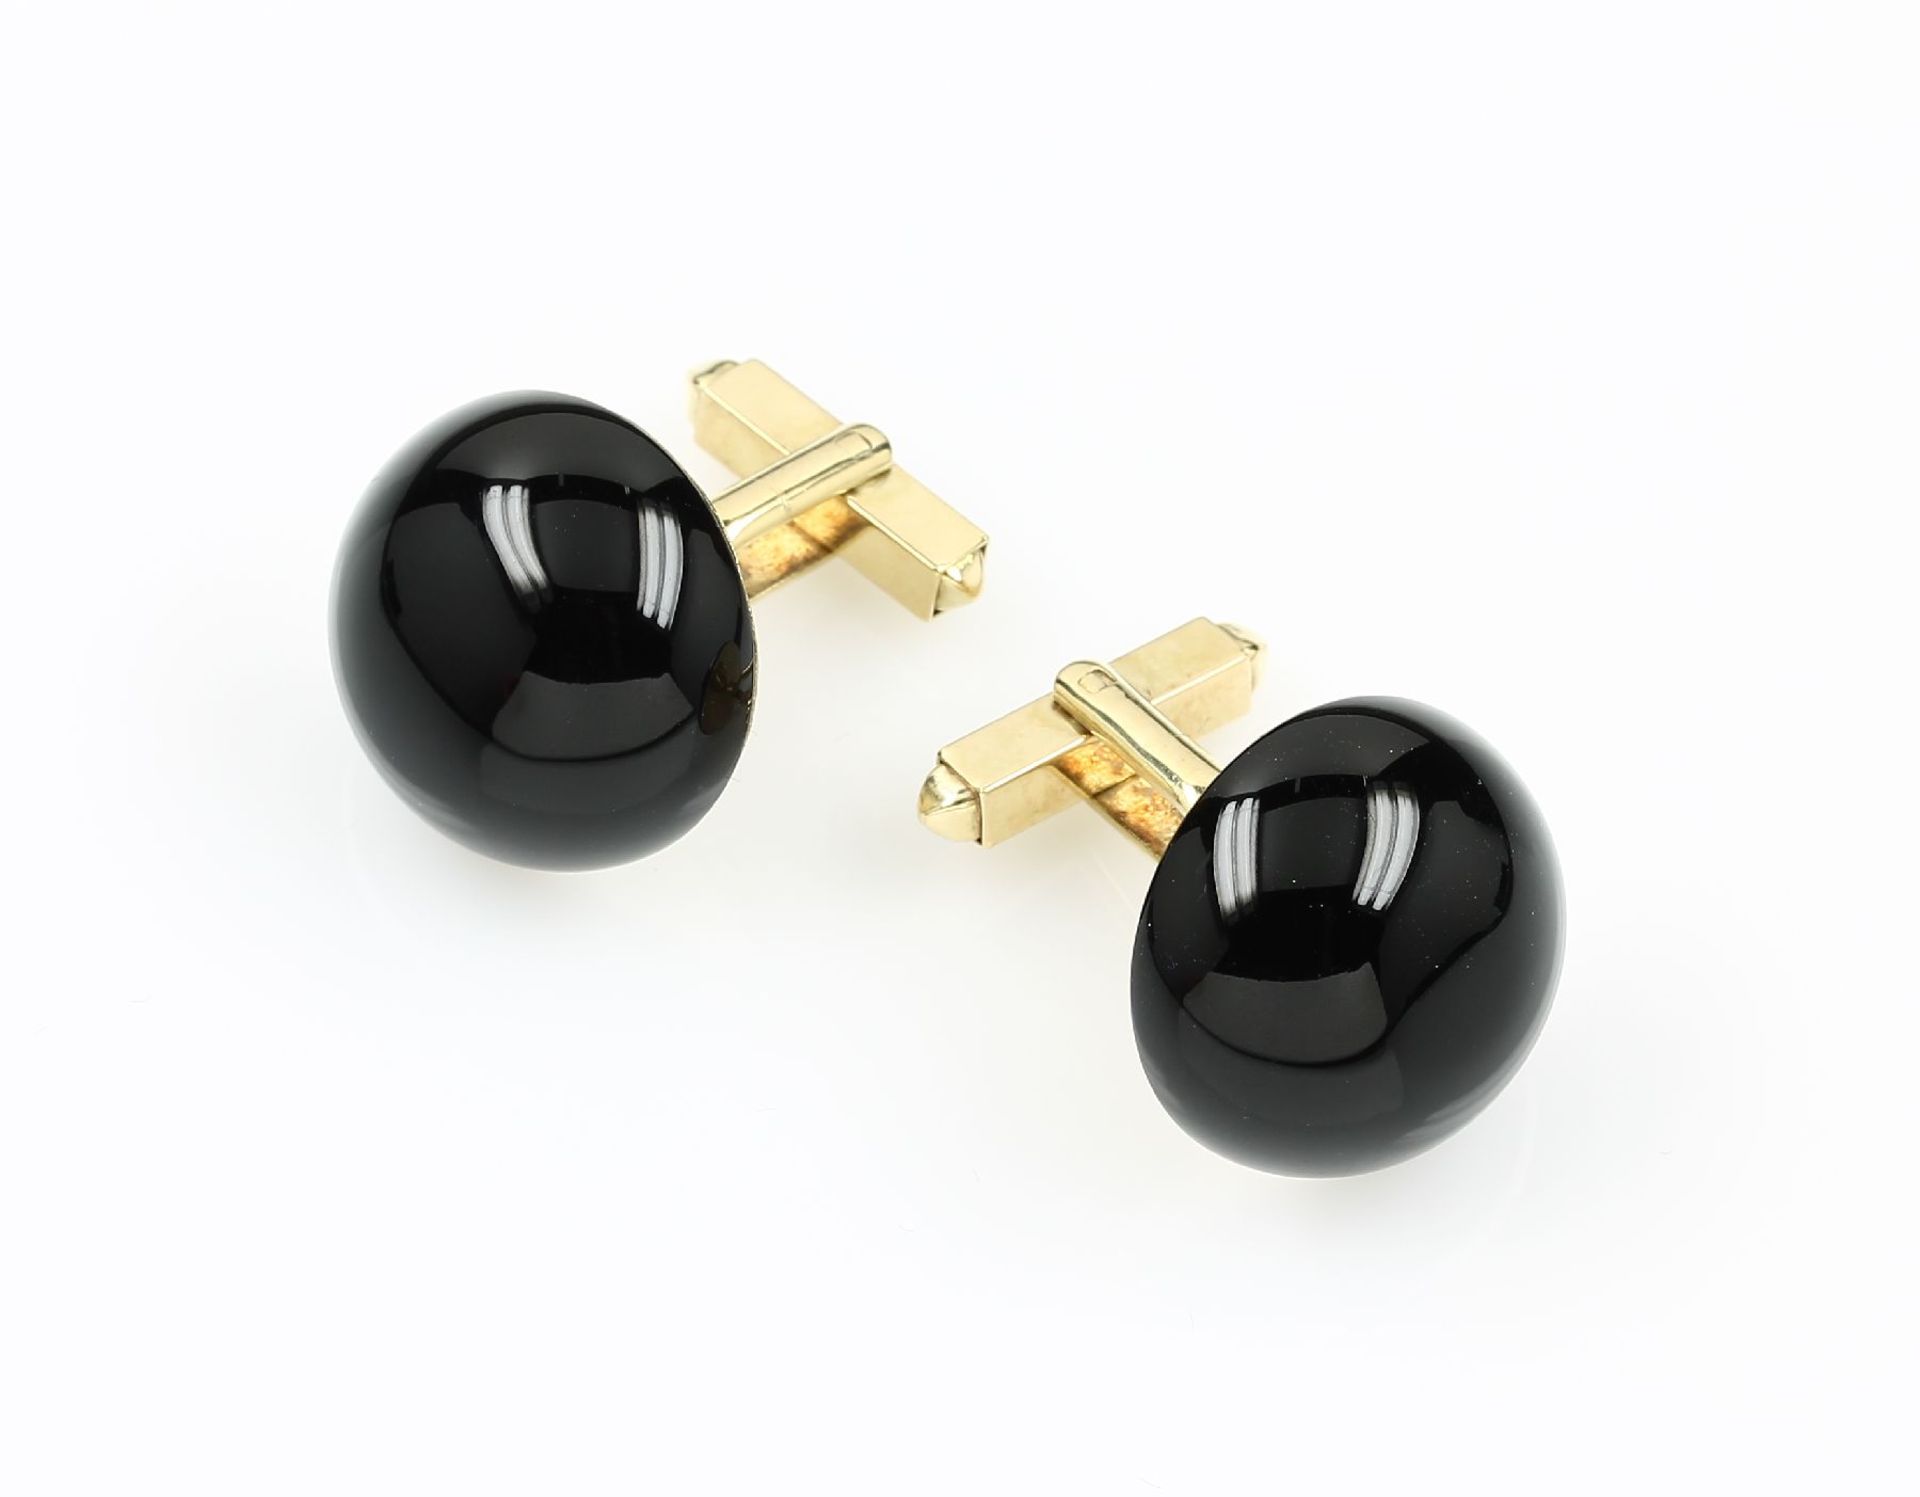 Pair of 14 kt gold cuff links with onyx , YG585/000, 2 onyx cabochons (treated), total approx. 23.35